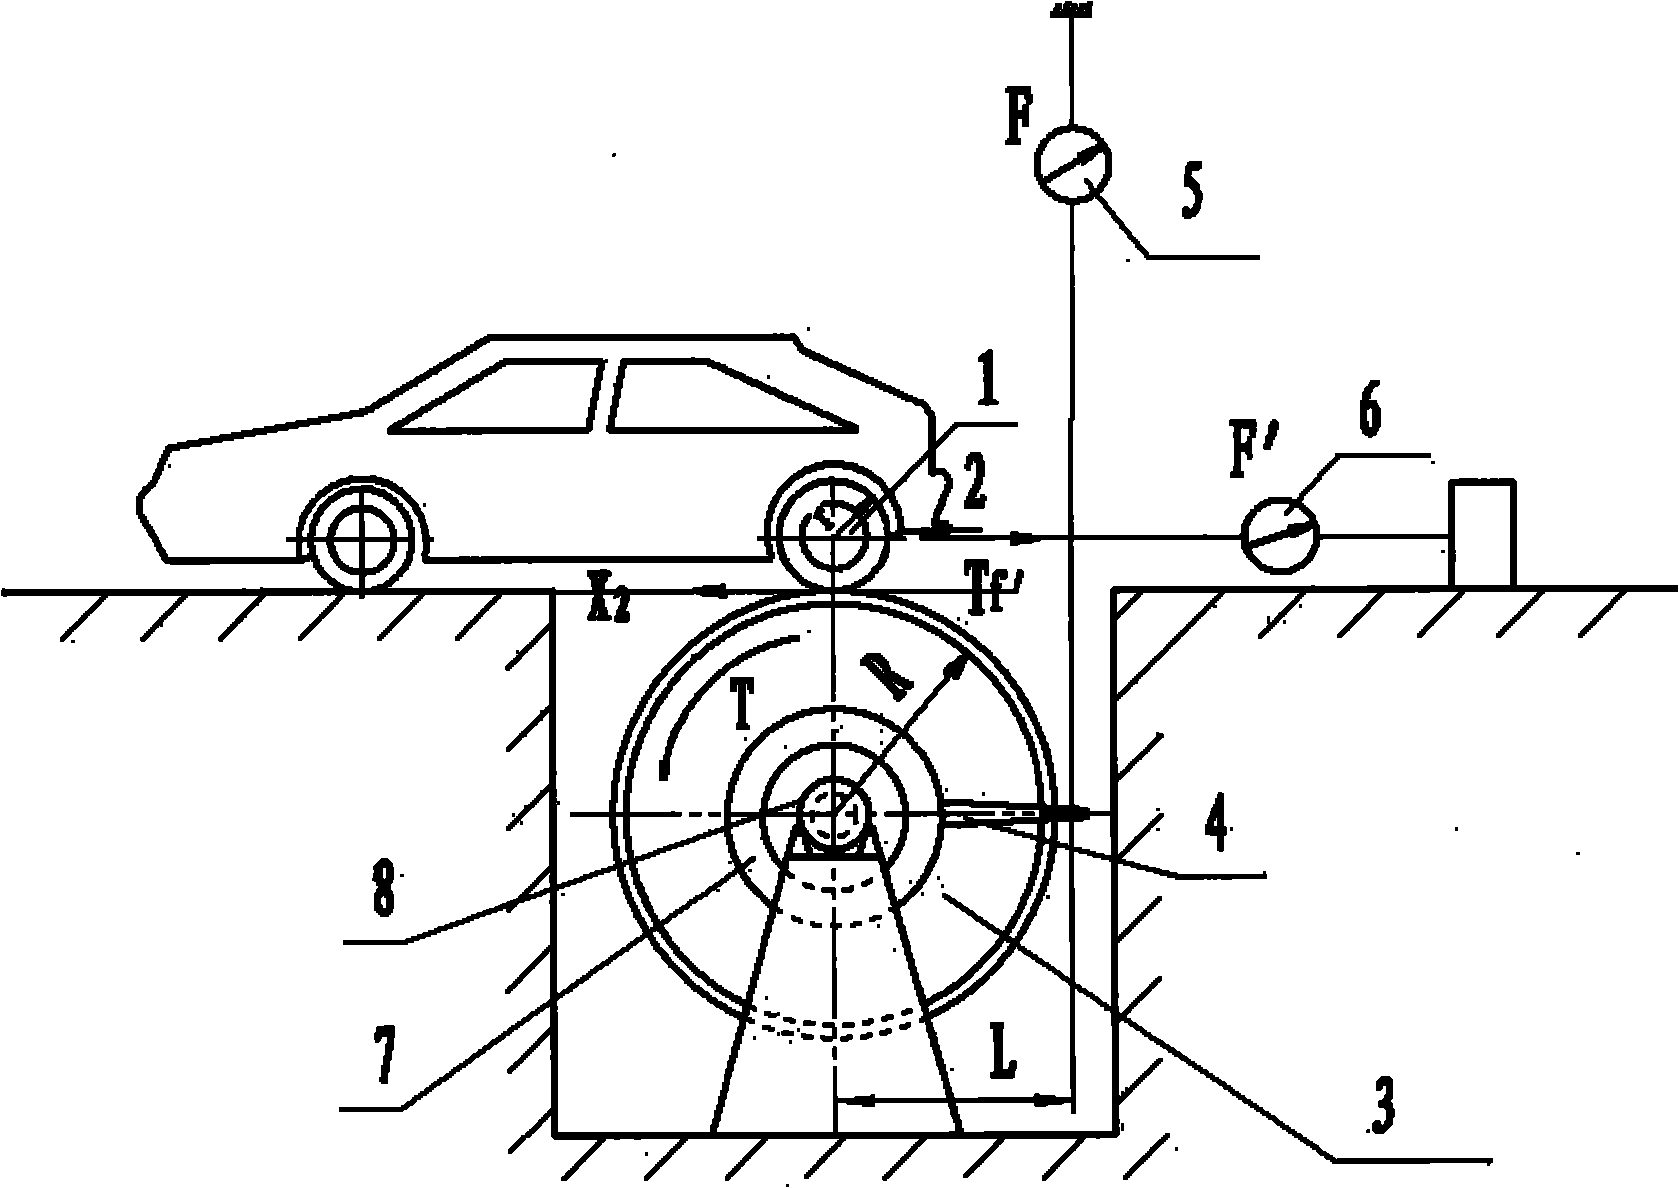 Undetached measurement device and method for transmission efficiency of automotive transmission system